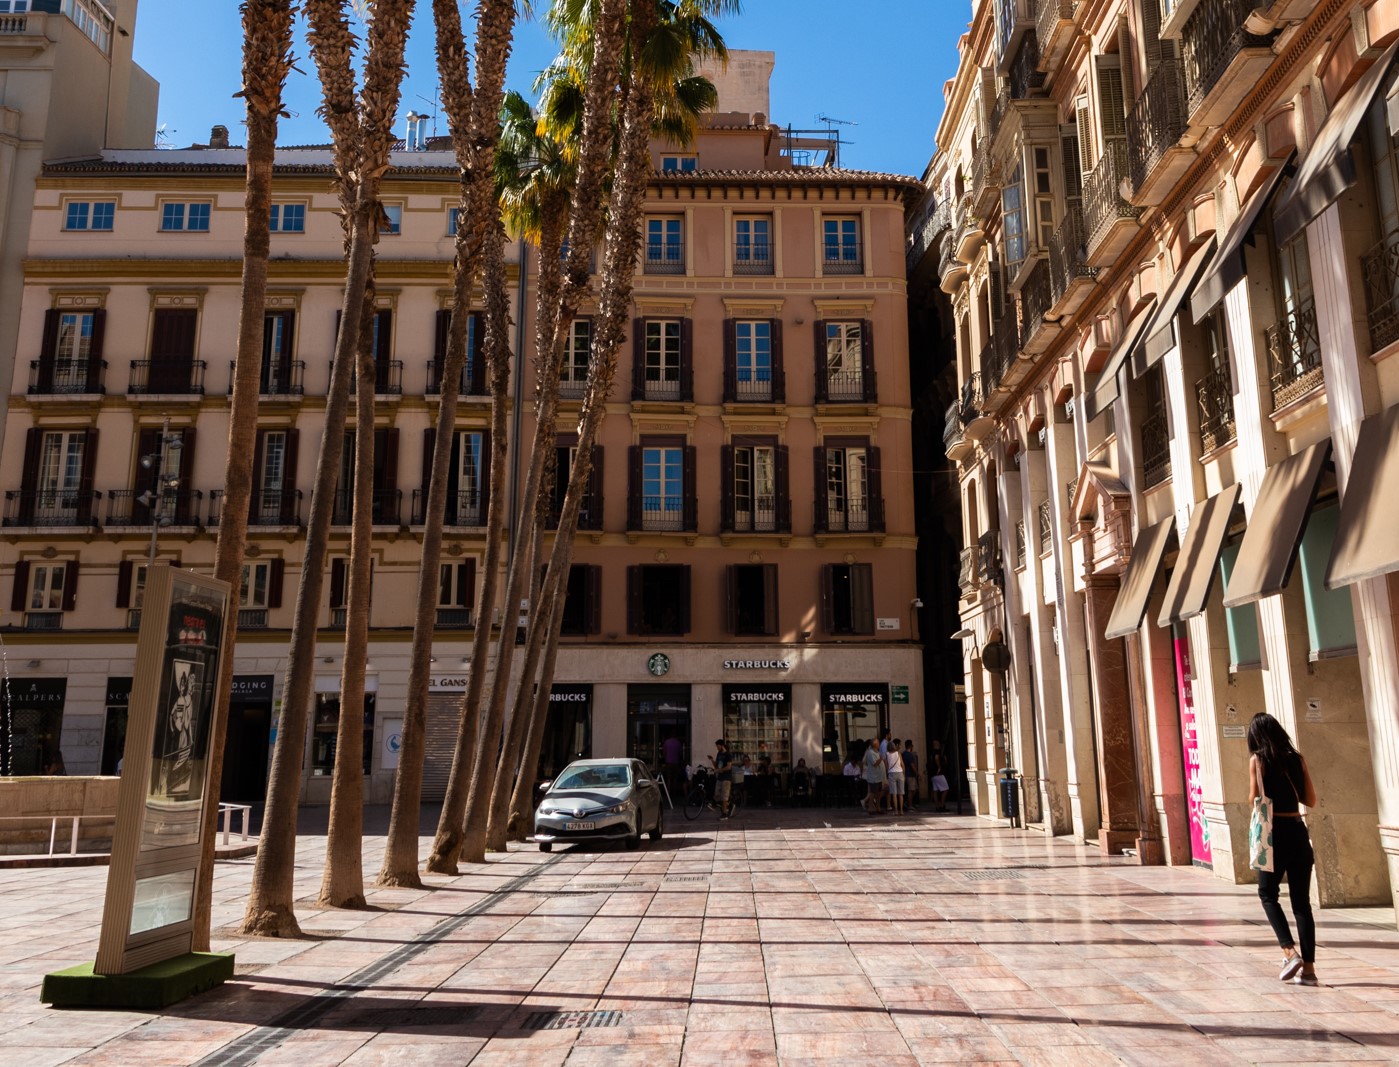 Old town of Malaga, Spain